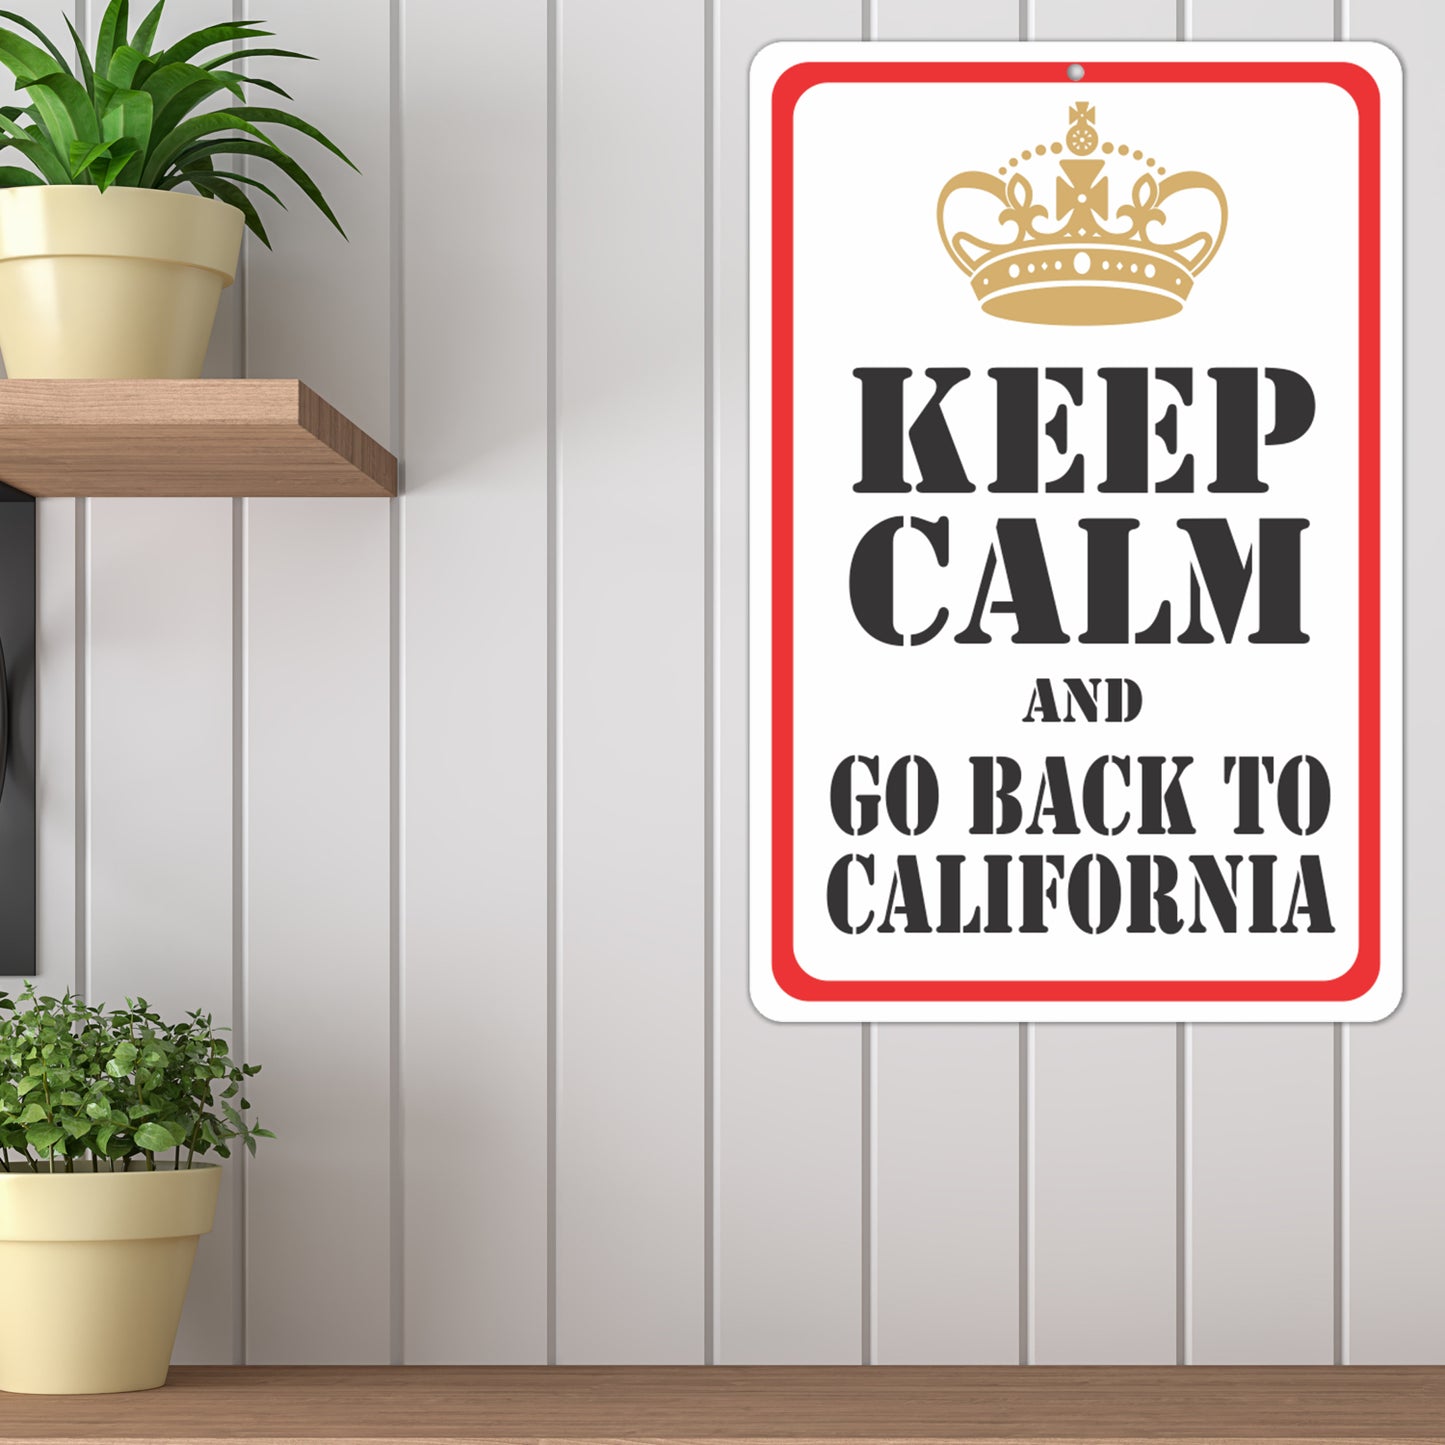 Funny Keep Calm Sign - Keep Calm and Go Back to California Sign - Size 8 x 12